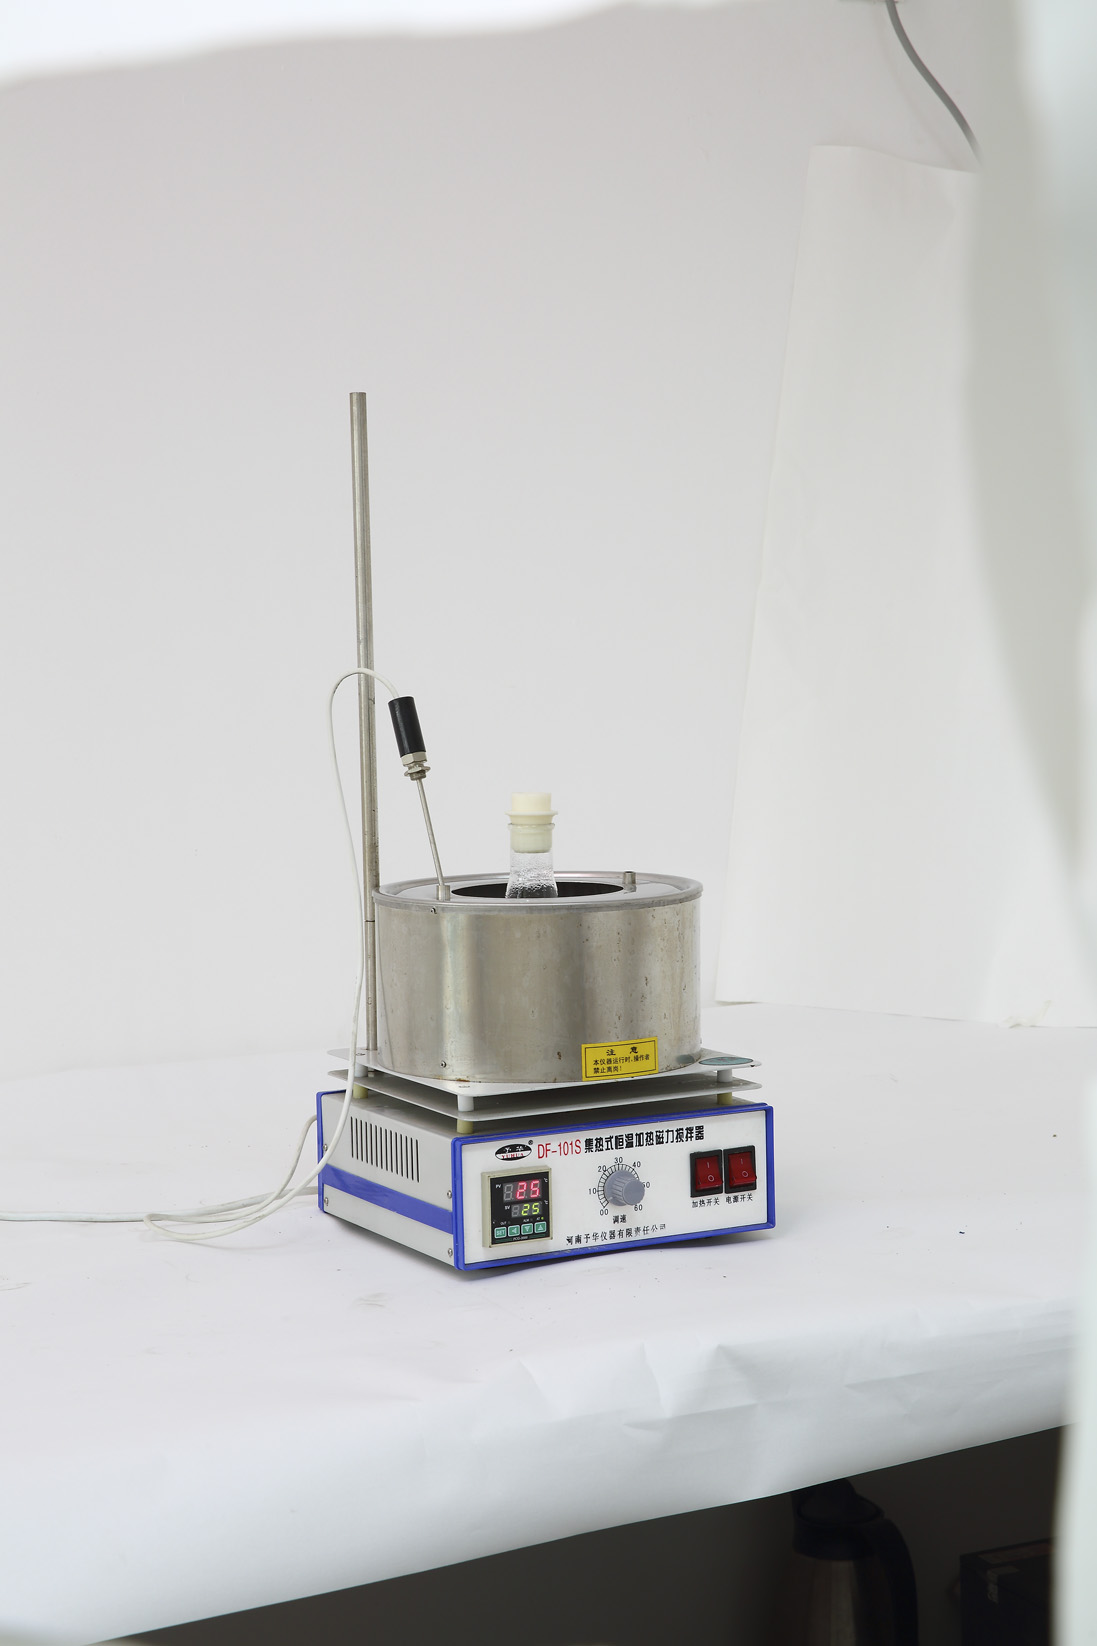 DF-101S constant temperature and heating magnetic stirrer with heat-collection pattern